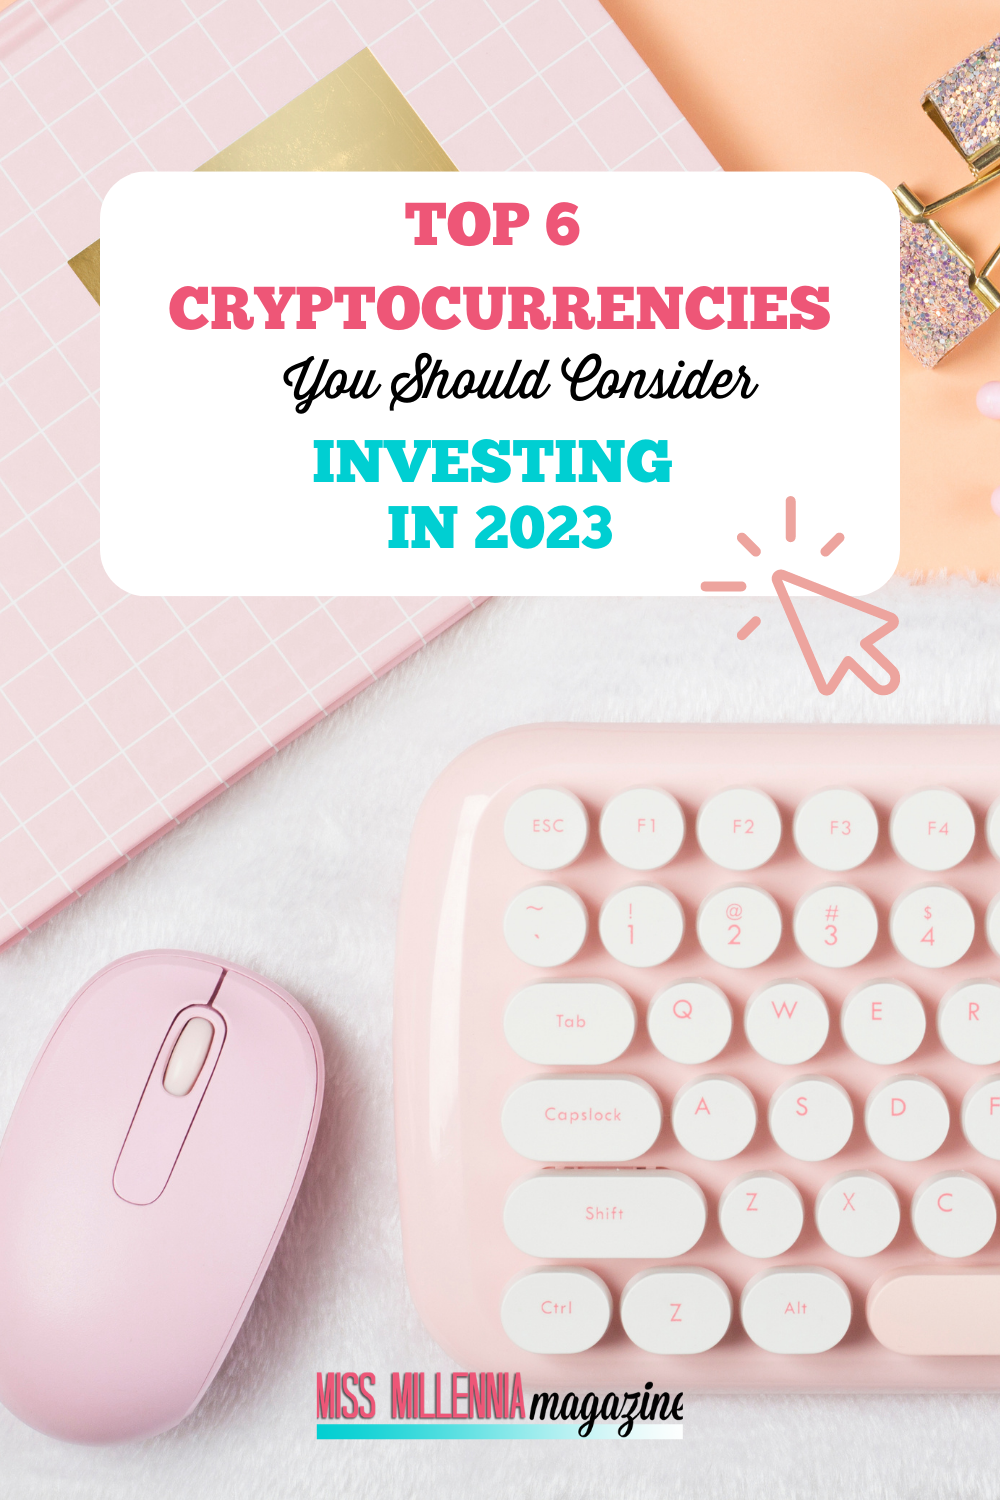 Top 6 Cryptocurrencies You Should Consider Investing in 2023